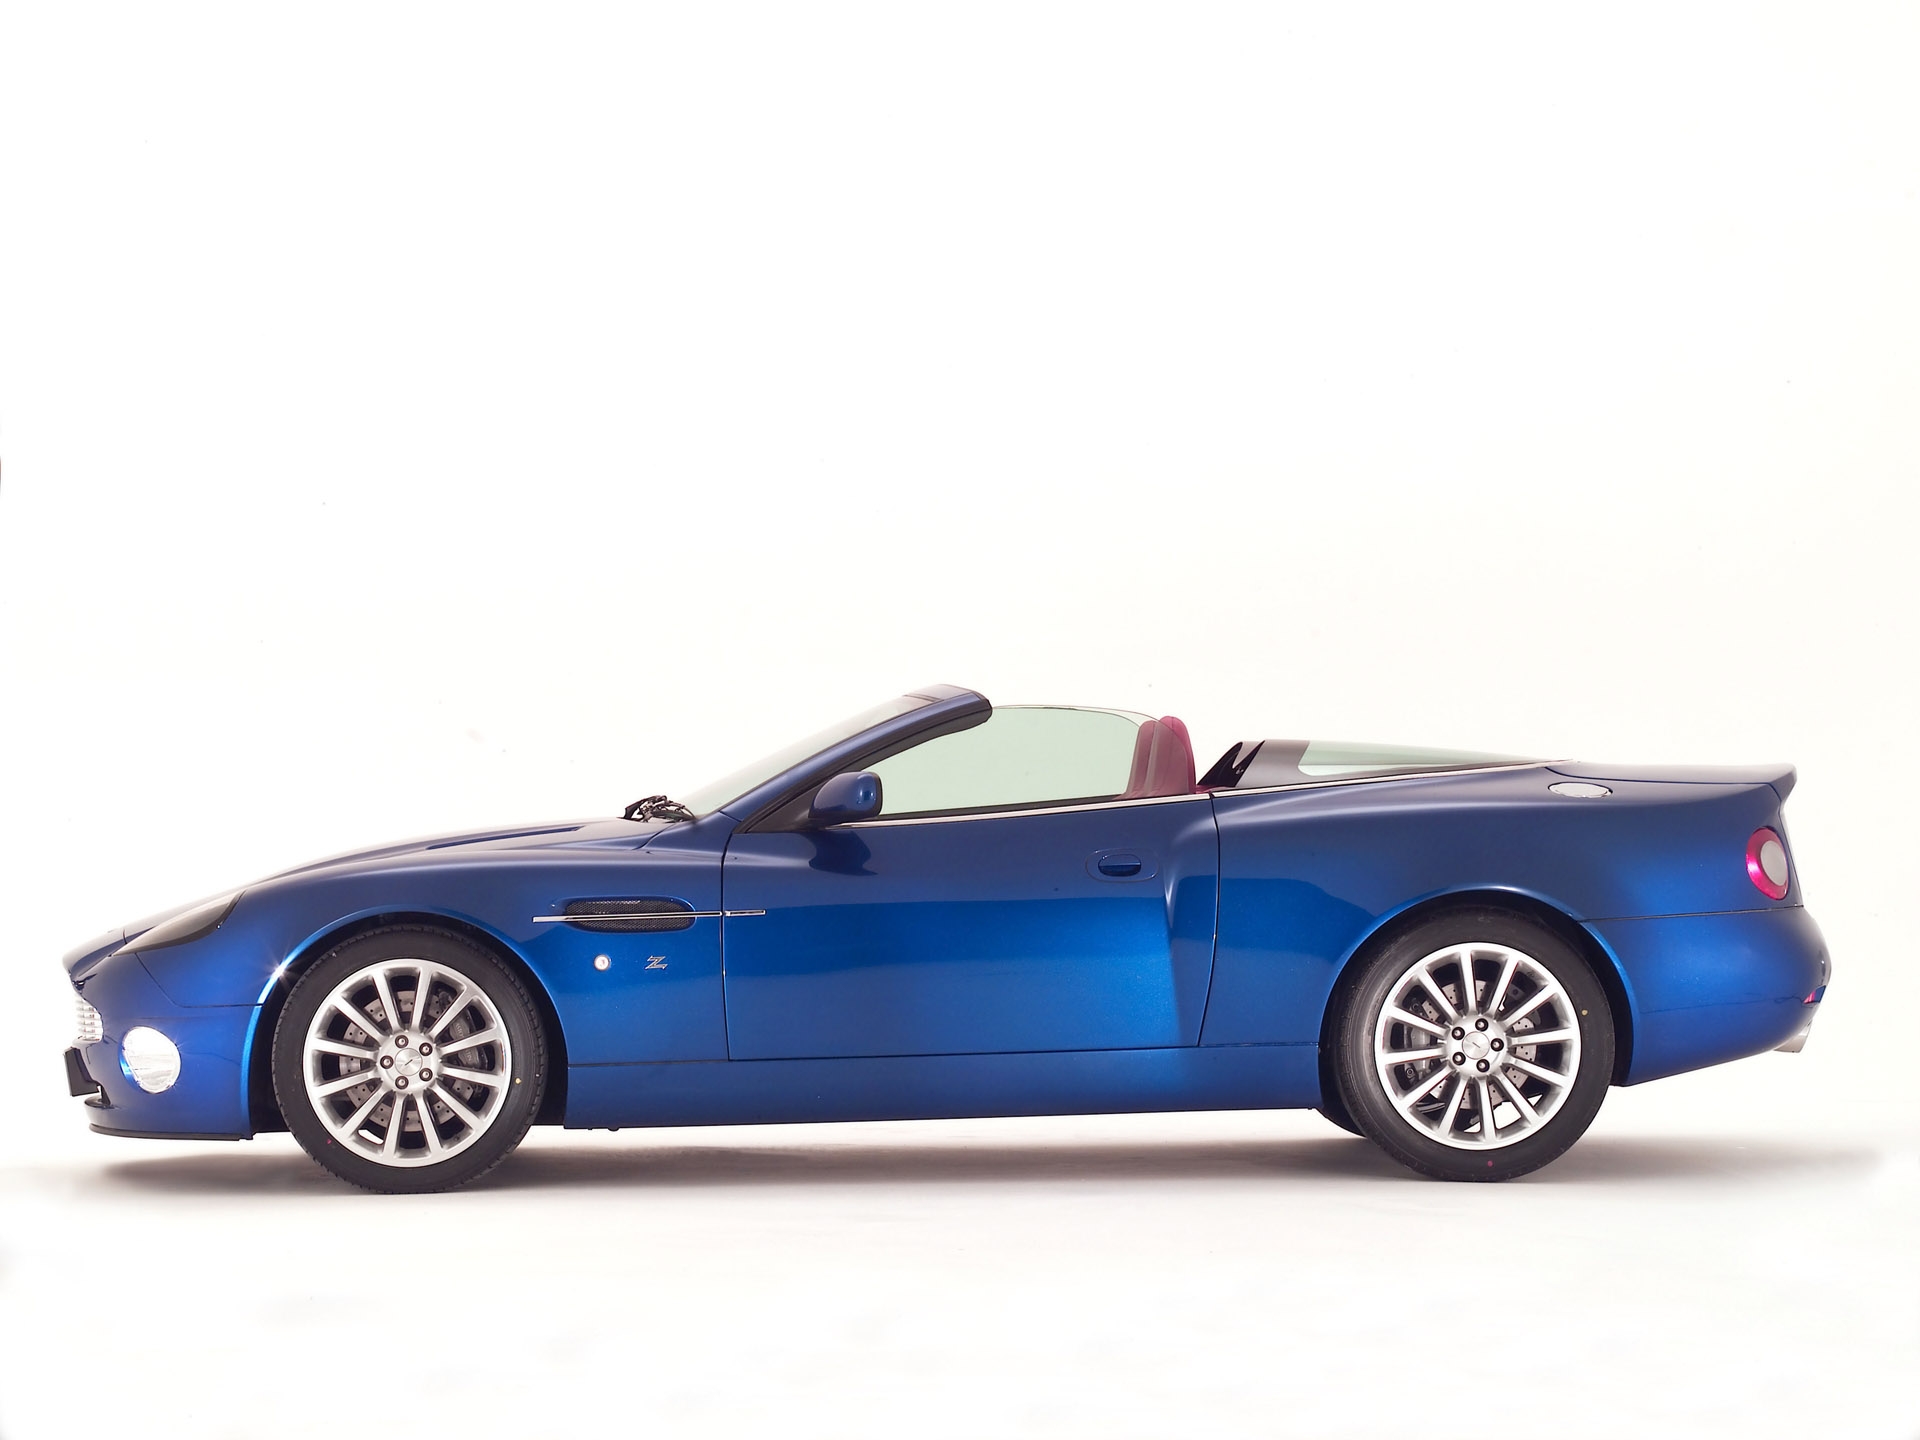 aston martin, auto, cars, blue, side view, style, 2004, v12, vanquish Panoramic Wallpaper